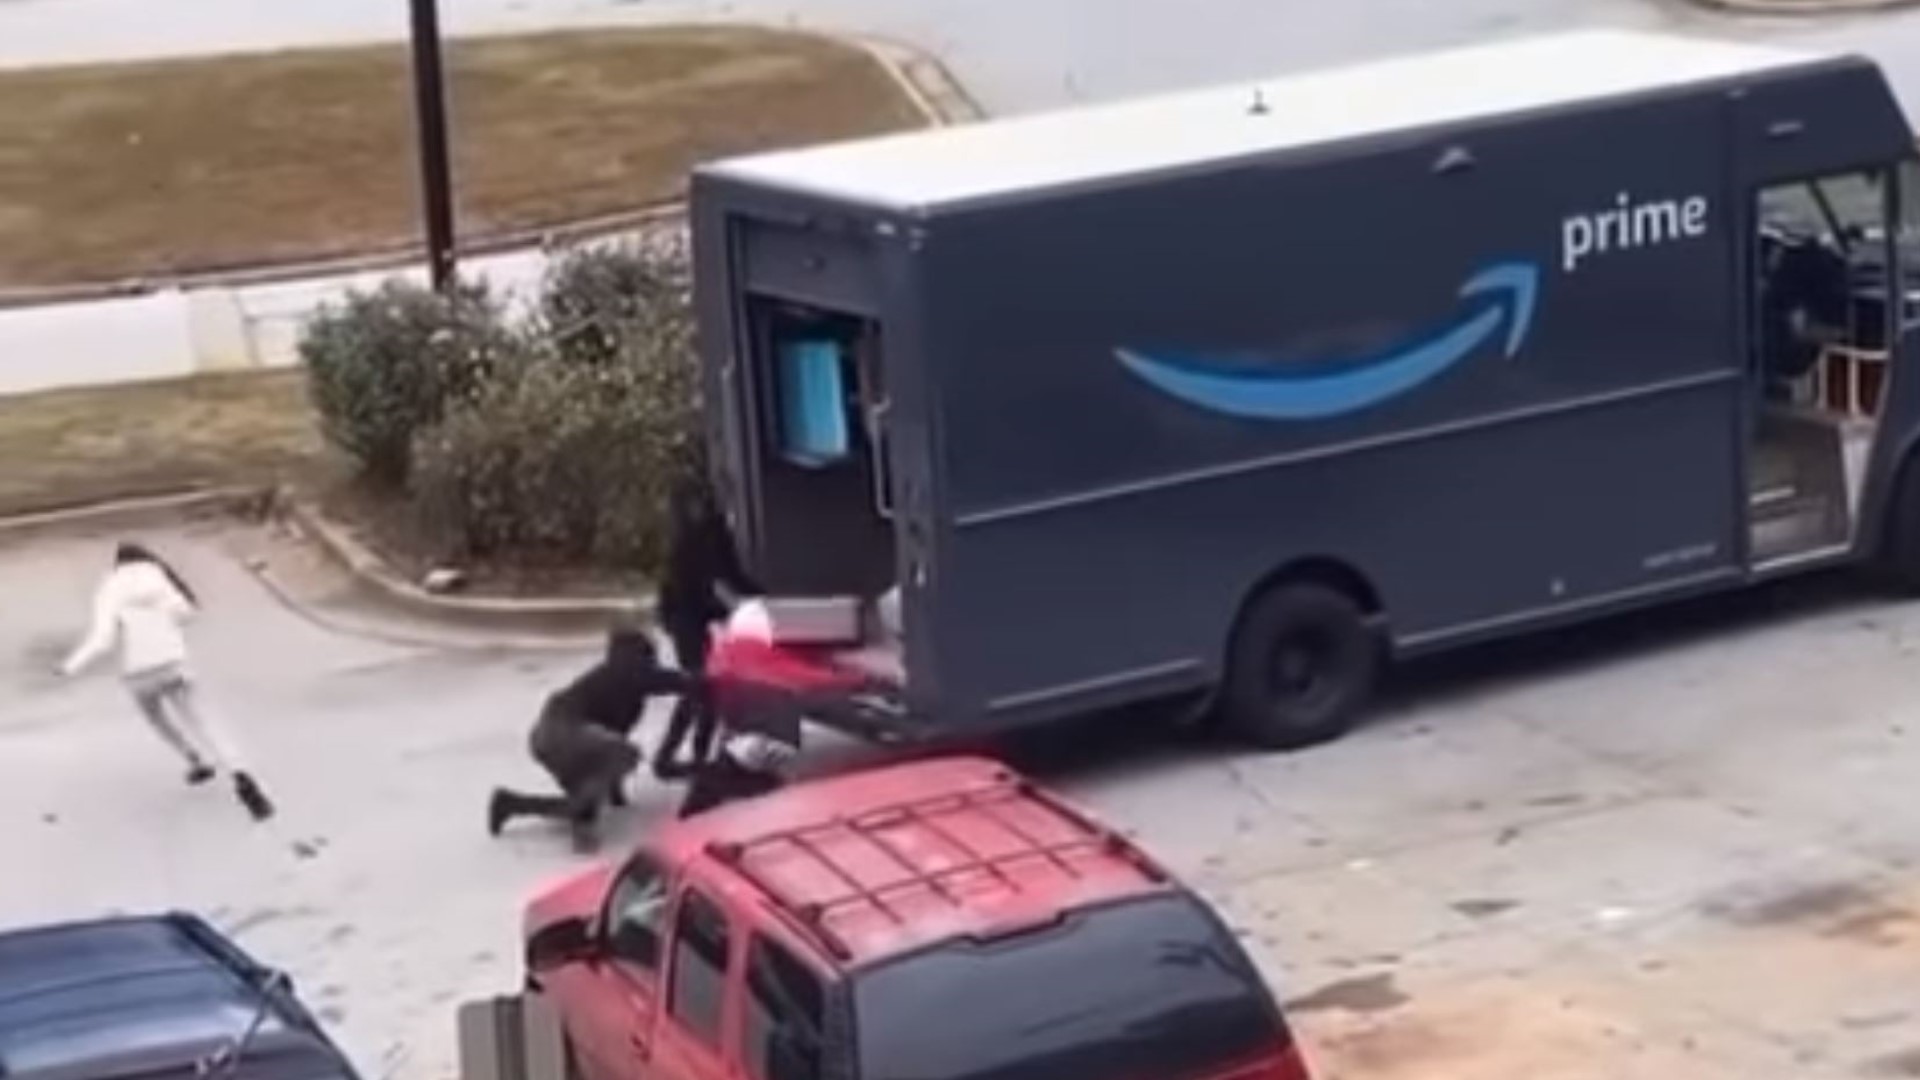 Atlanta Police are now searching for several people they said were involved in stealing from an Amazon delivery truck.